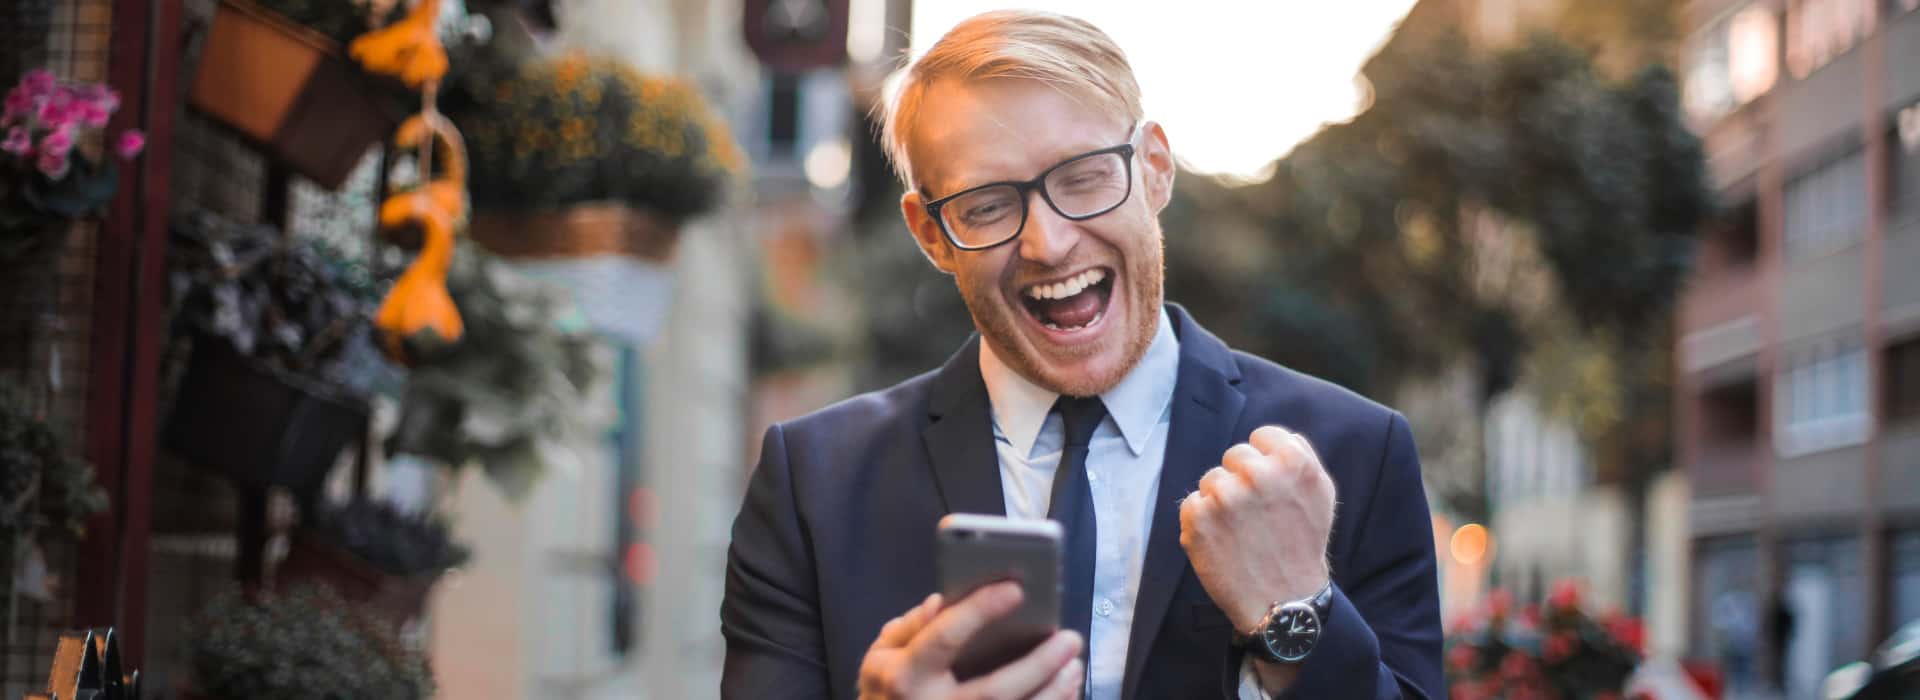 Man celebrating with successful message on phone